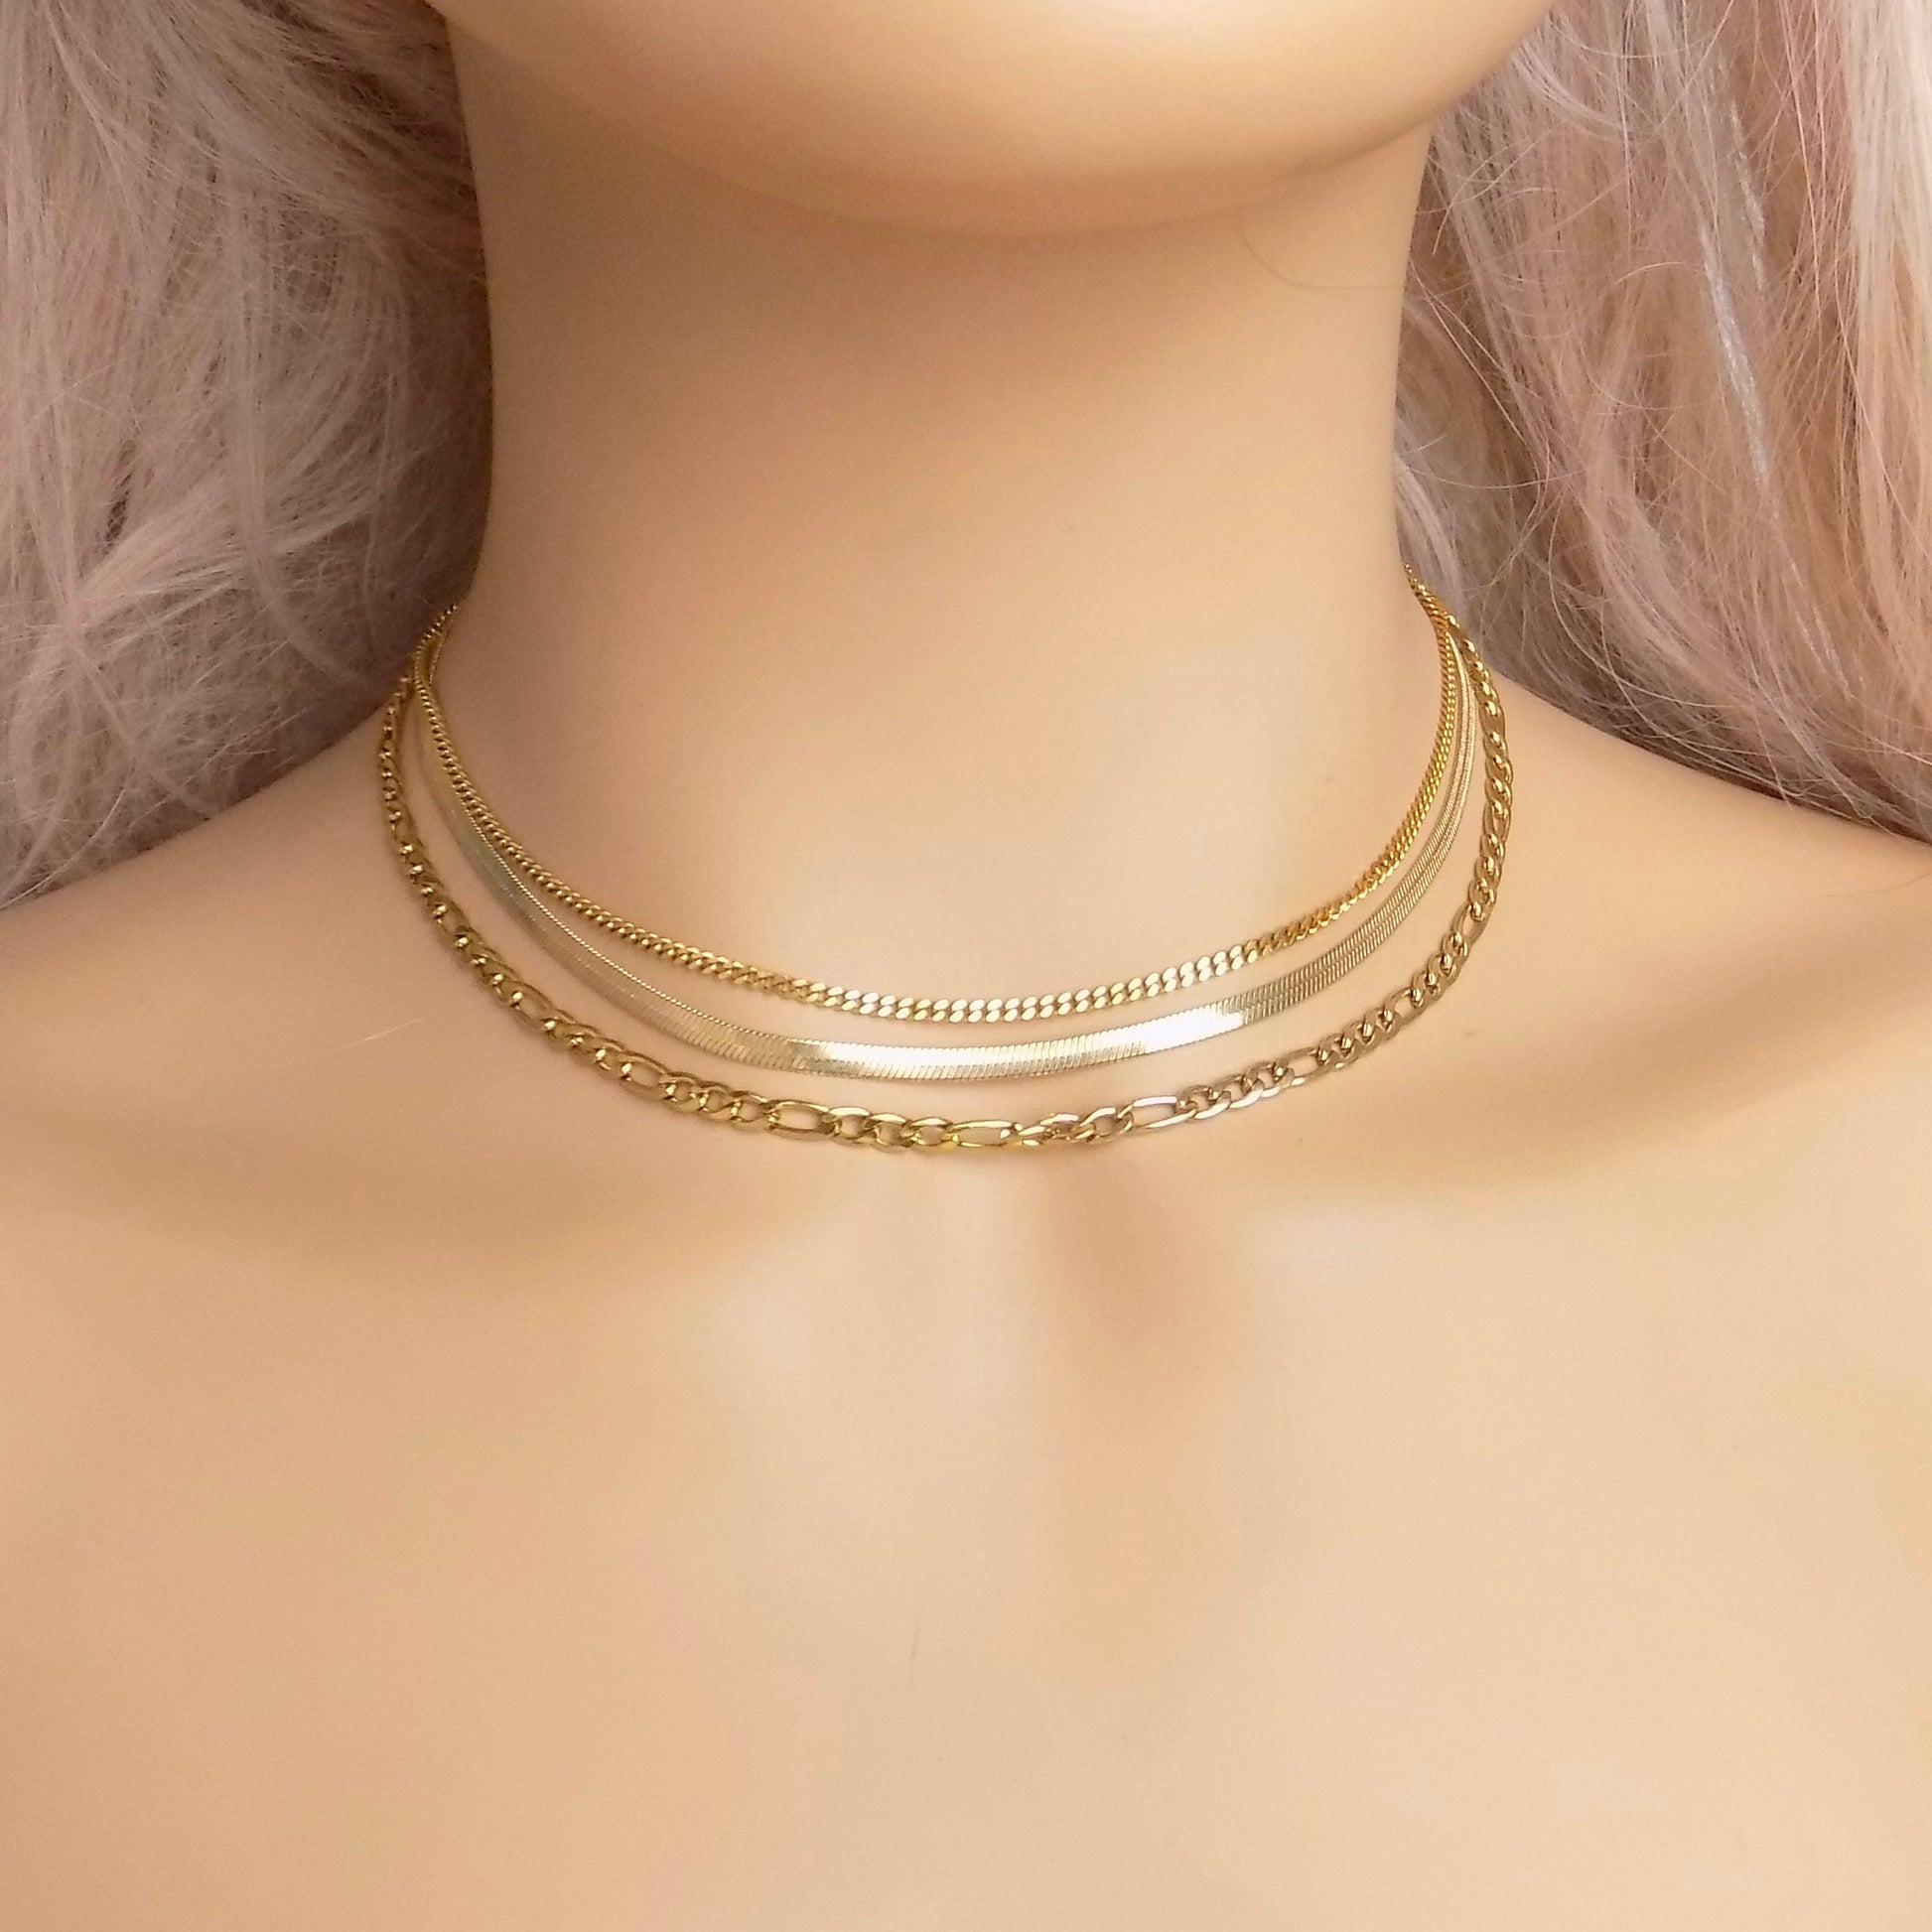 Gold Choker Necklace - 18K Gold Stainless Steel Chain